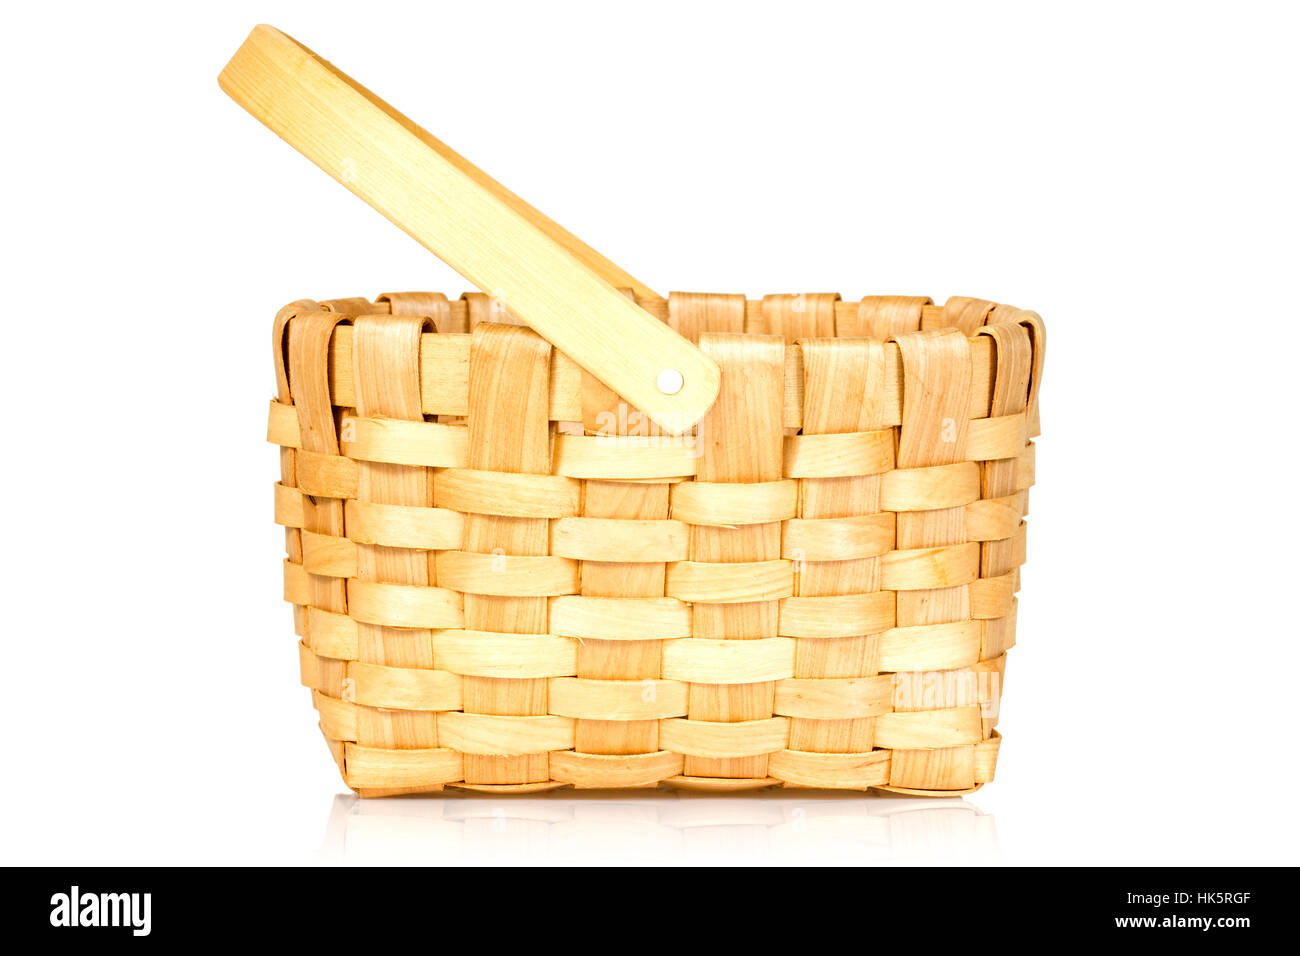 object, isolated, brown, brownish, brunette, basket, handle, decoration, Stock Photo